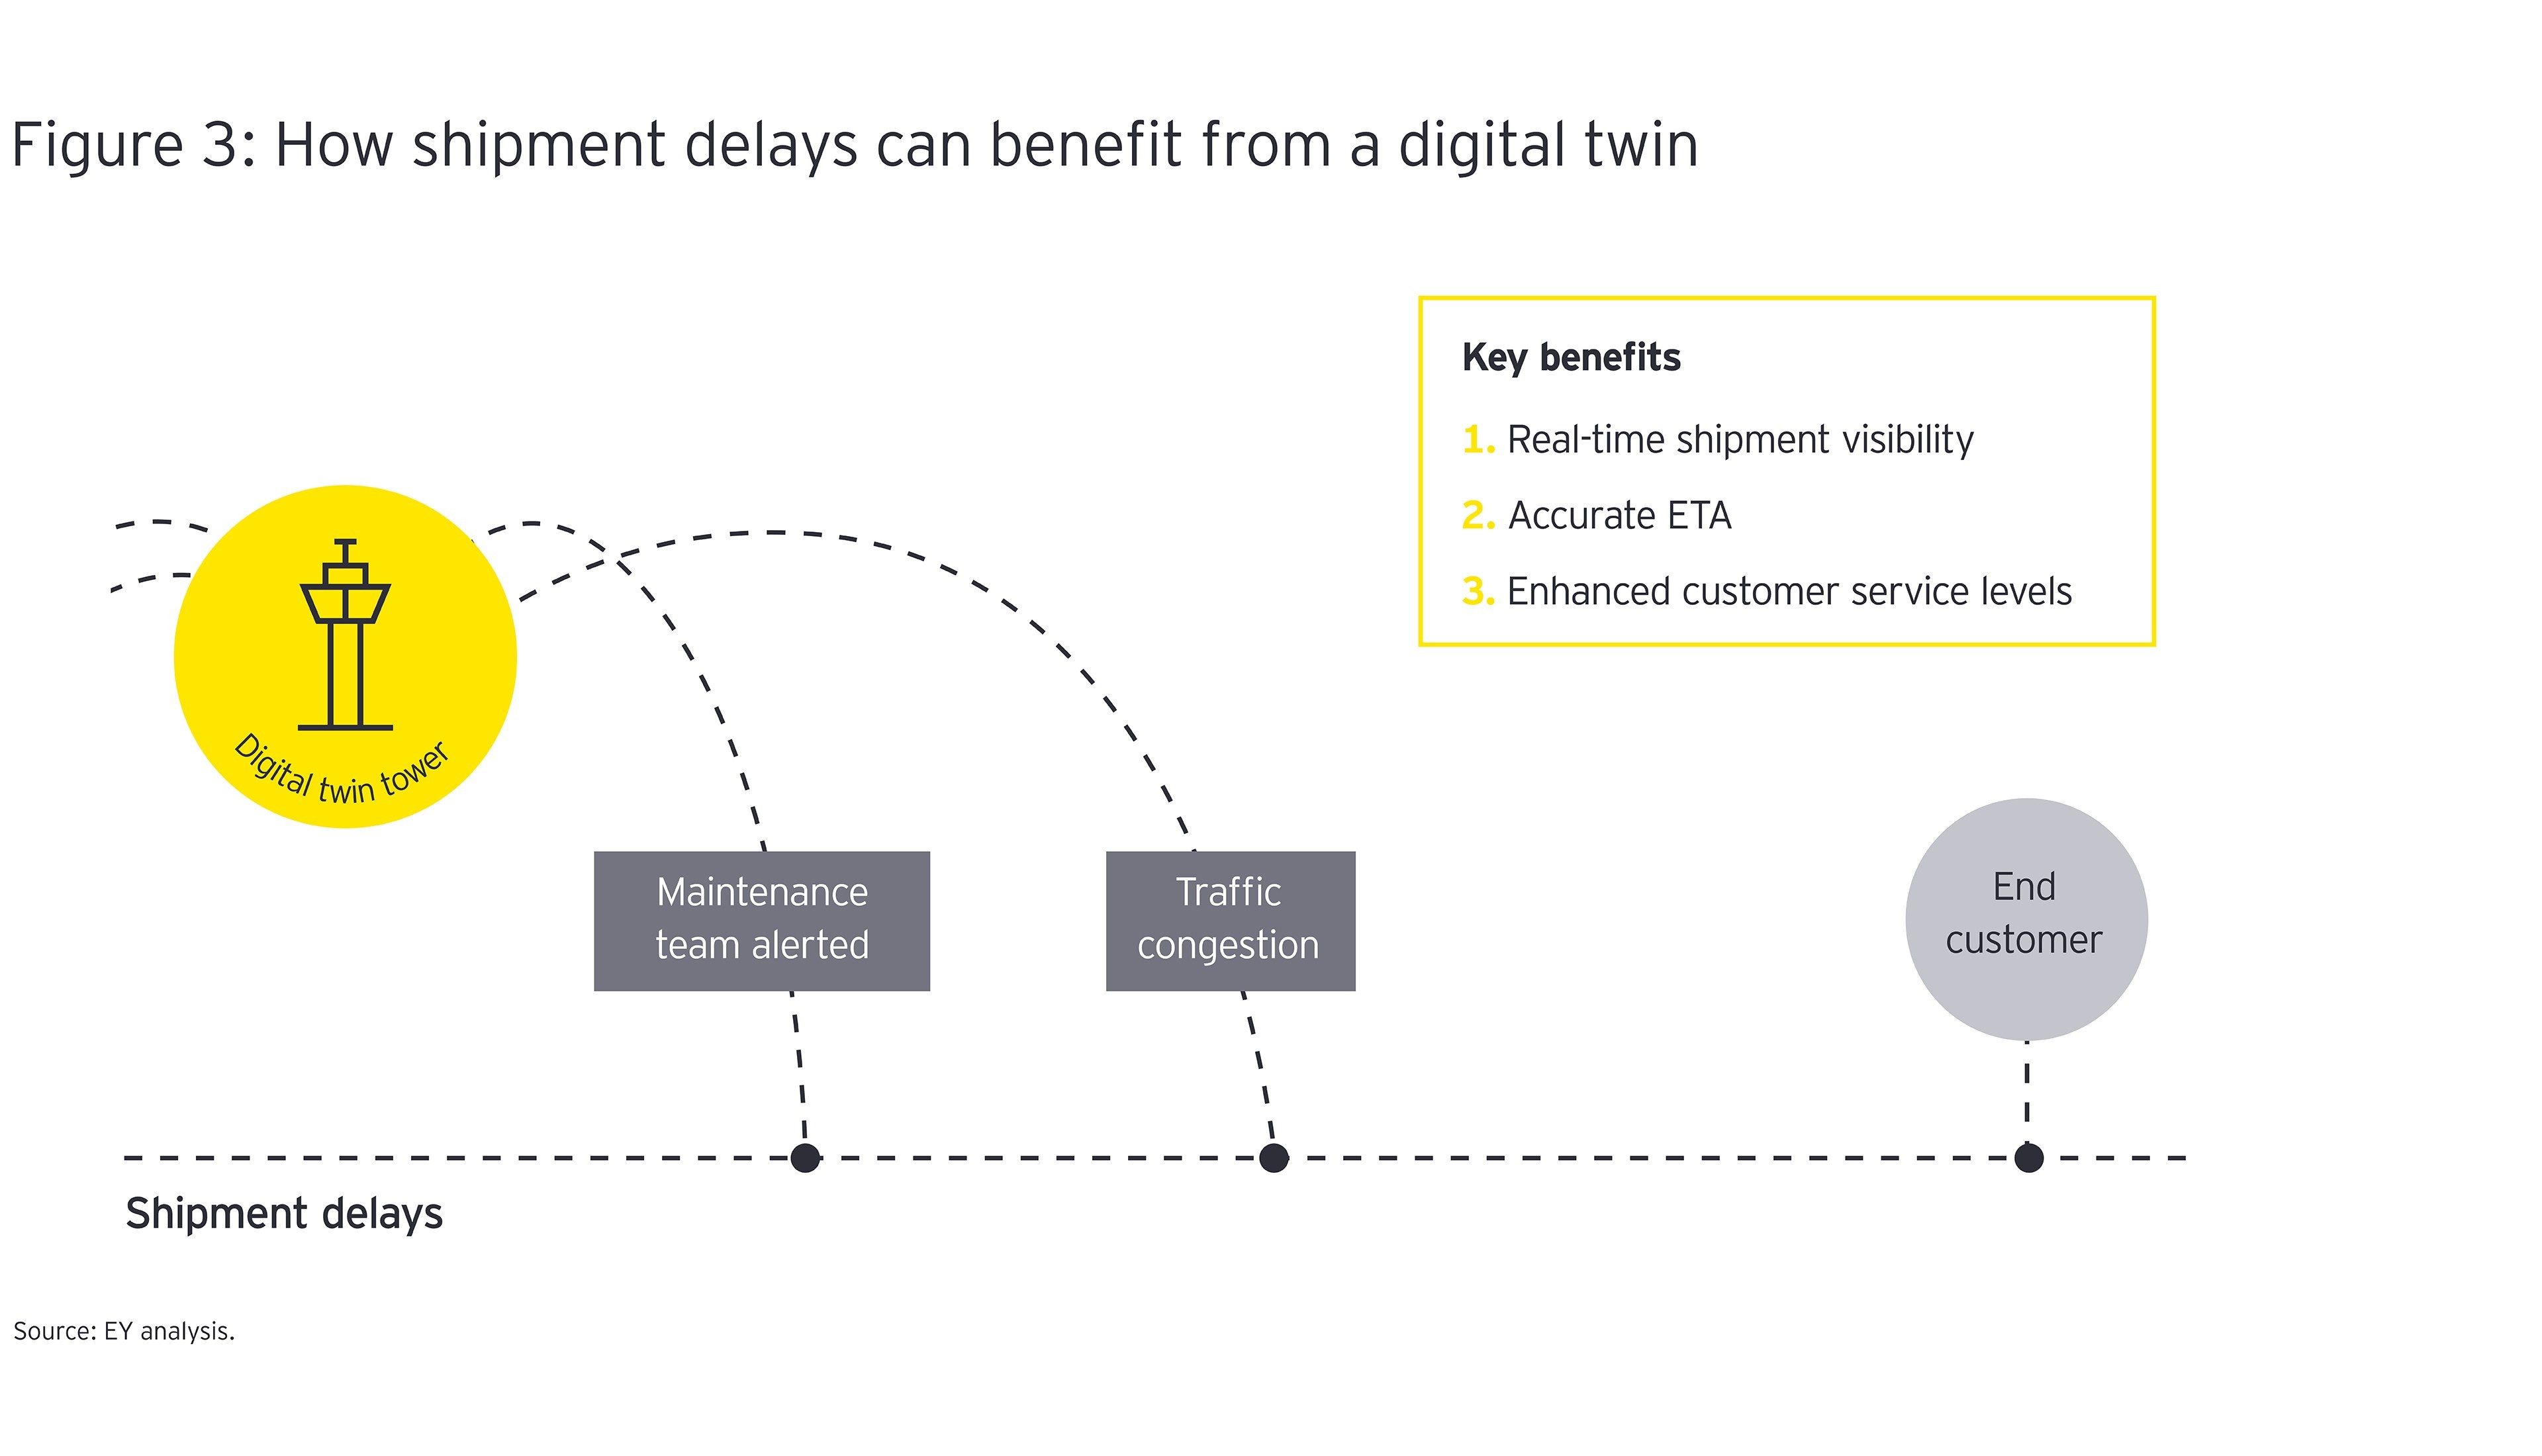 How shipment delays can benifit from a digital twin